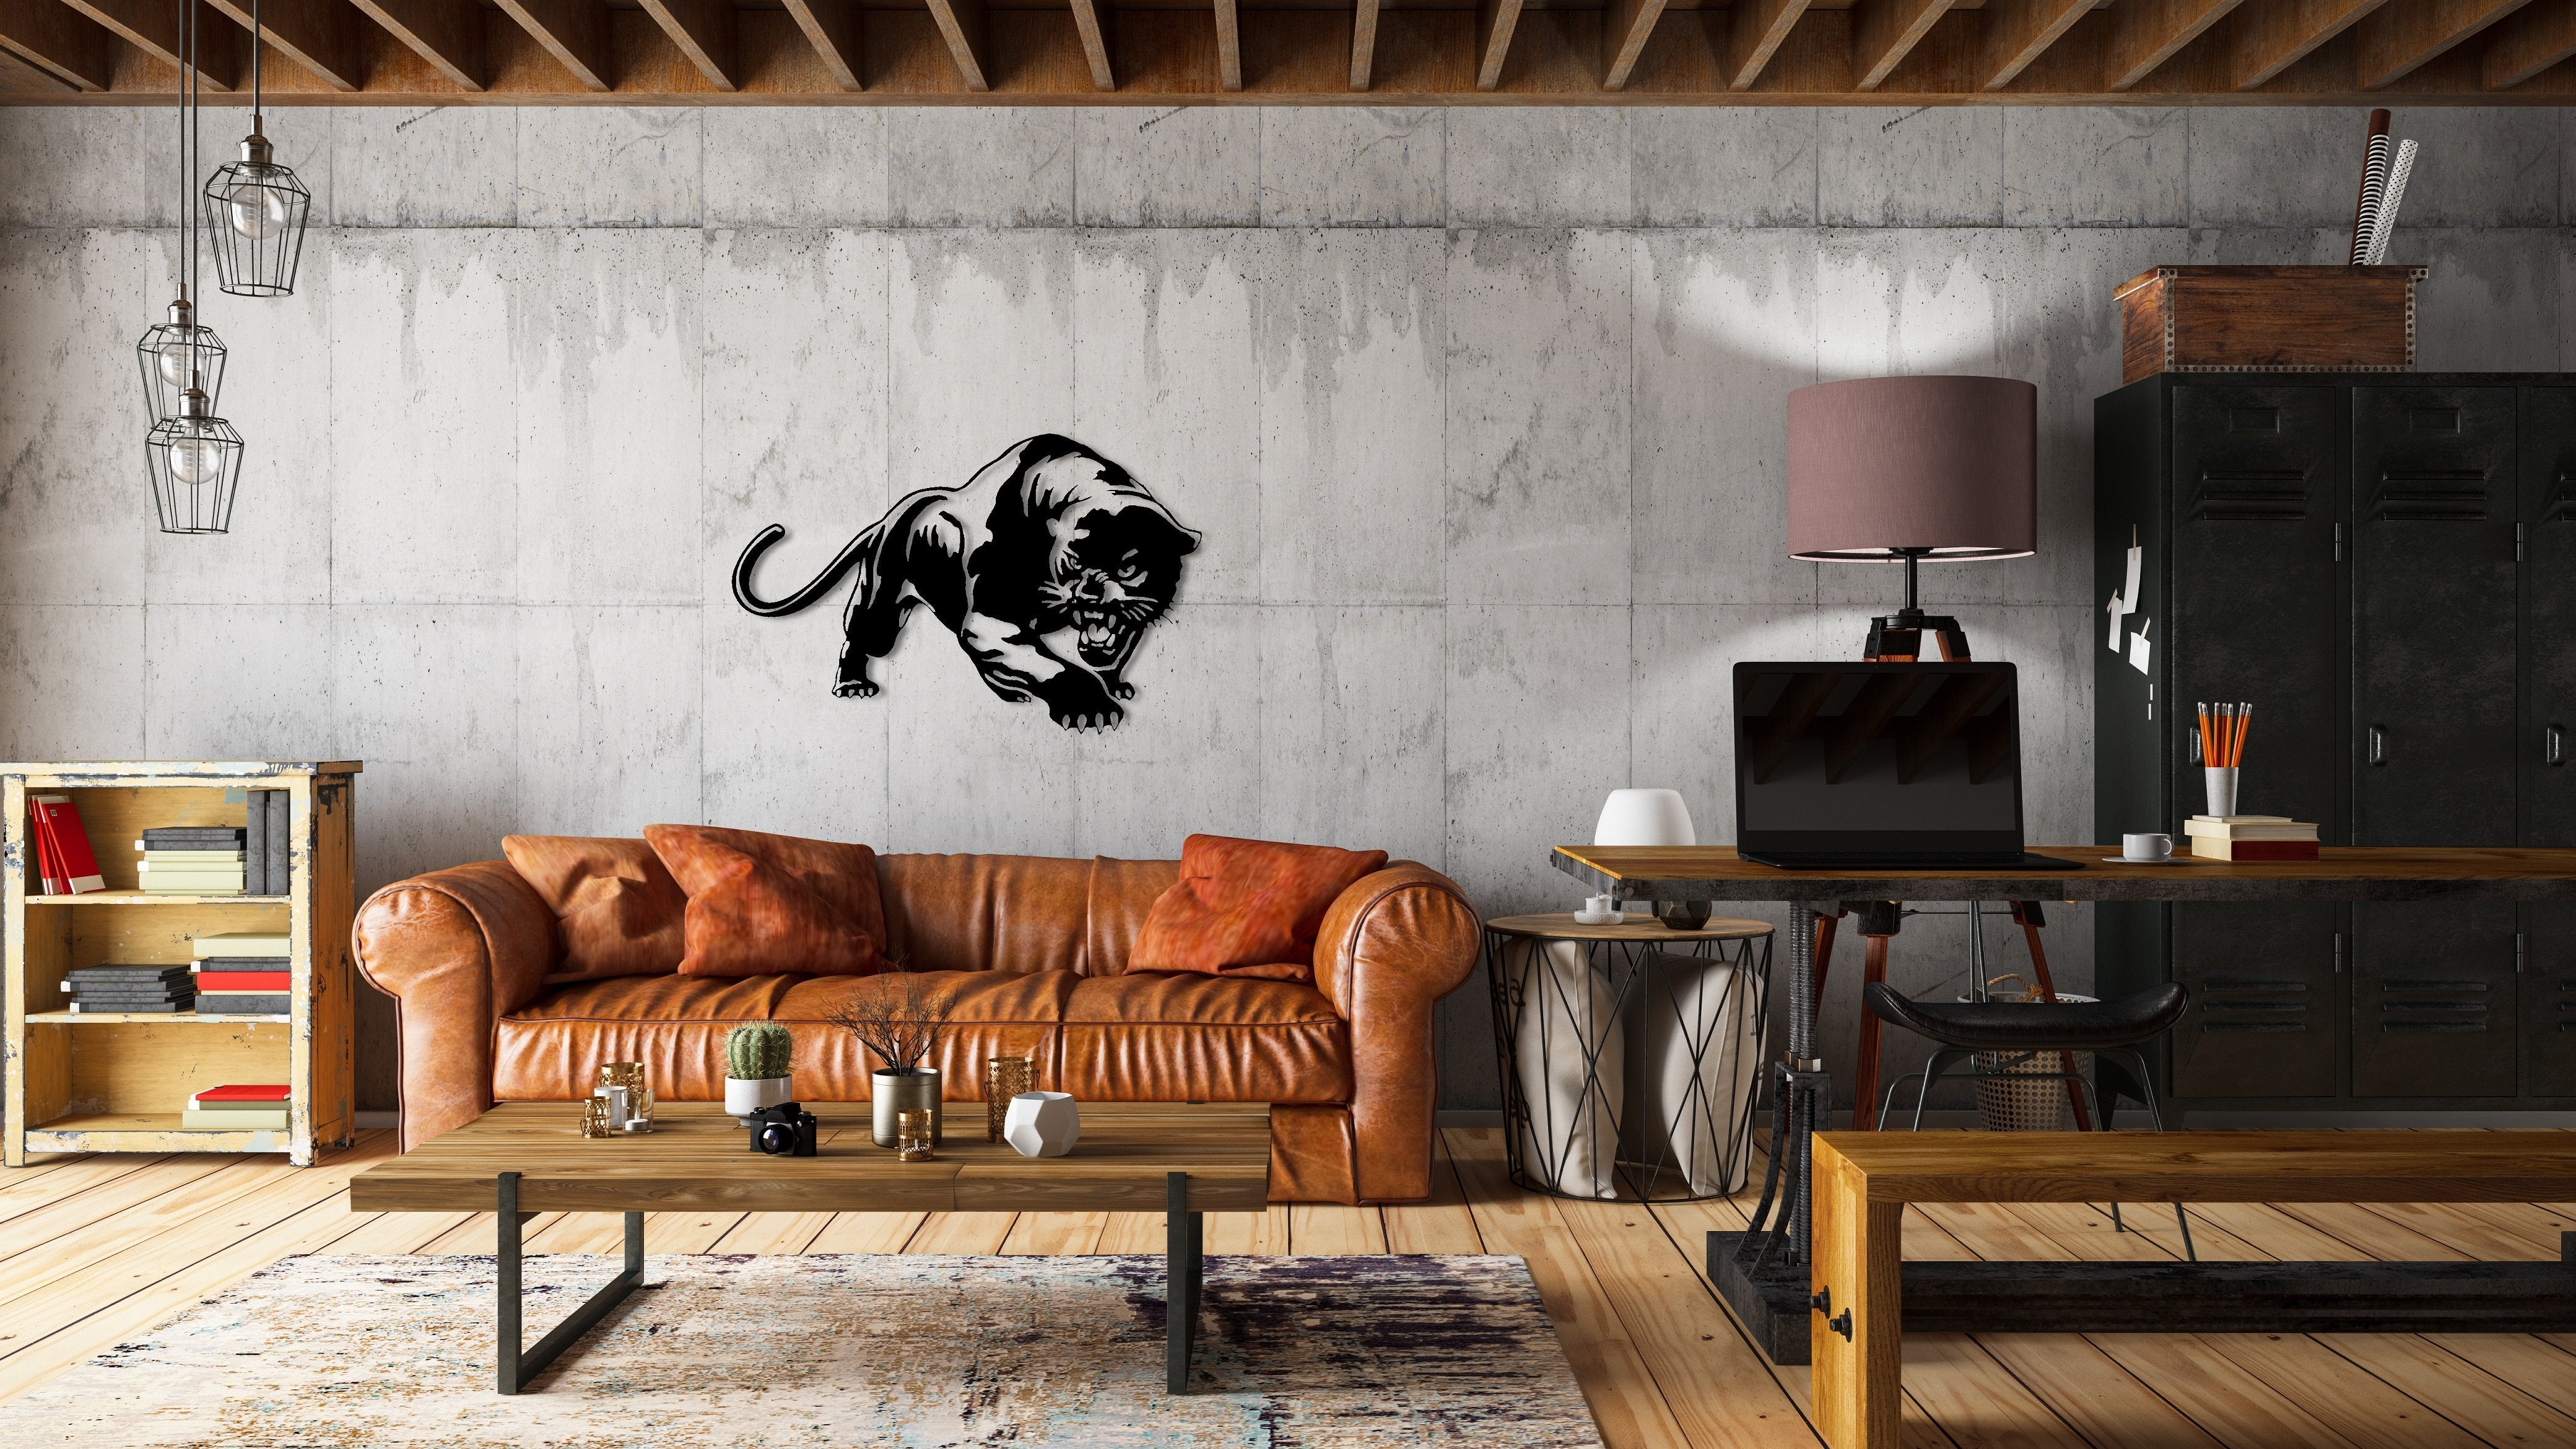 ・"Panther"・Premium Metal Wall Art - Limited Edition